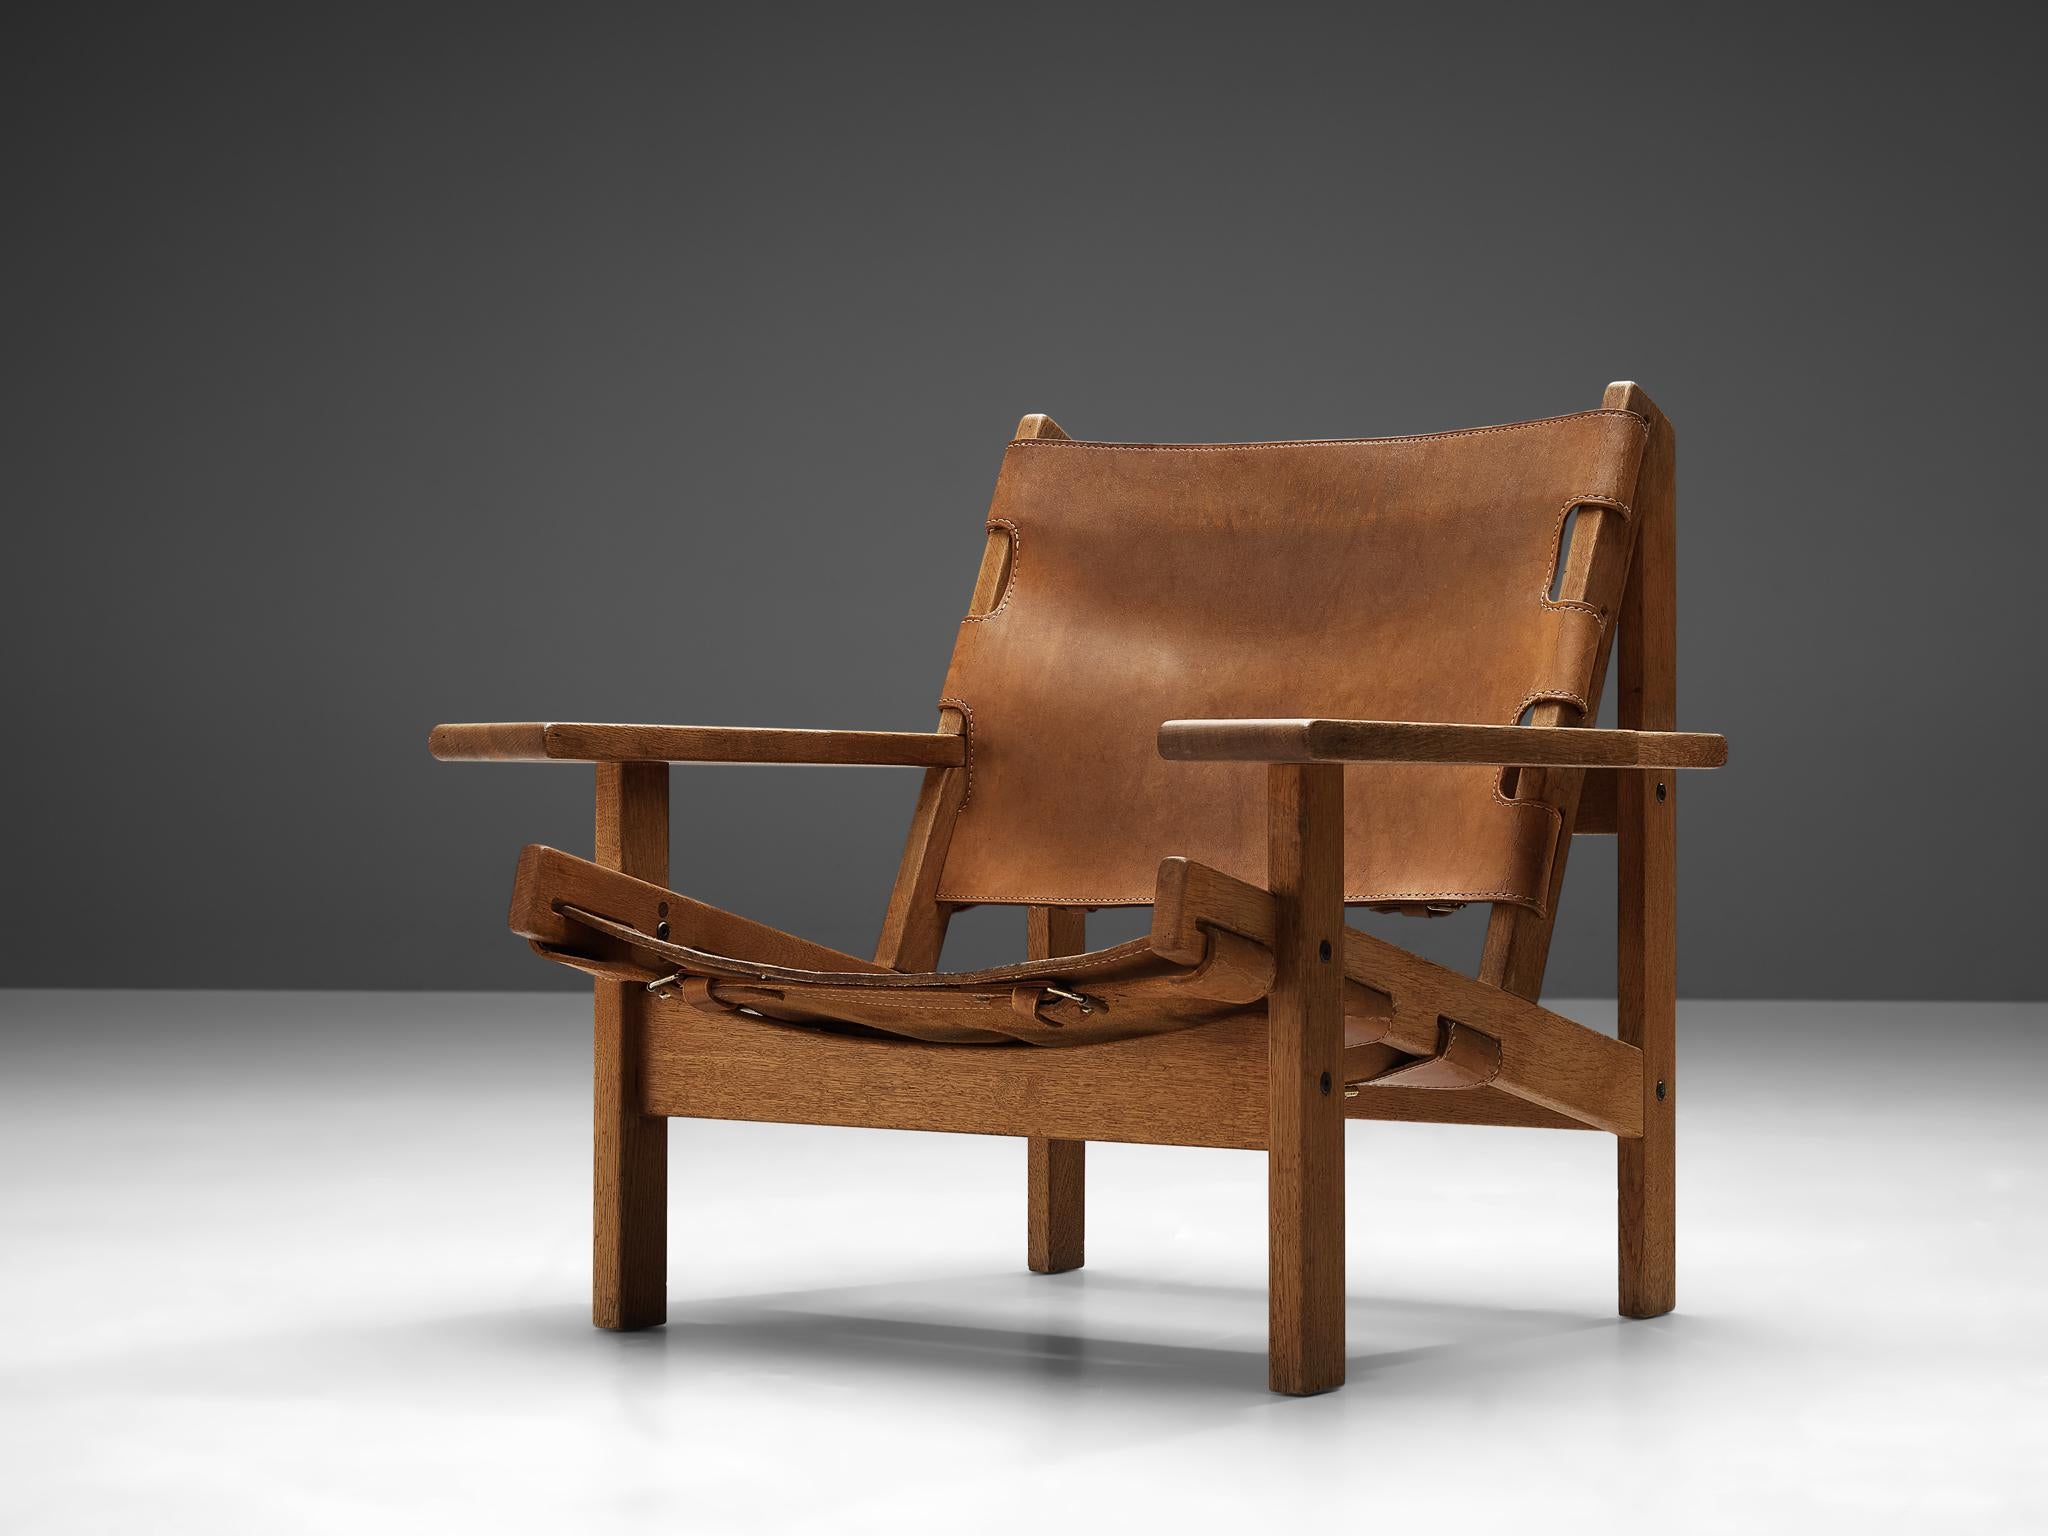 Kurt Østervig for K.P. Jørgensens Møbler, 'Hunting' armchair, model '168', oak, leather, metal, Denmark, 1960

This lounge chair shows exquisite Danish craftsmanship and aesthetics. It features traits of hunting chairs by means of its strong, sturdy